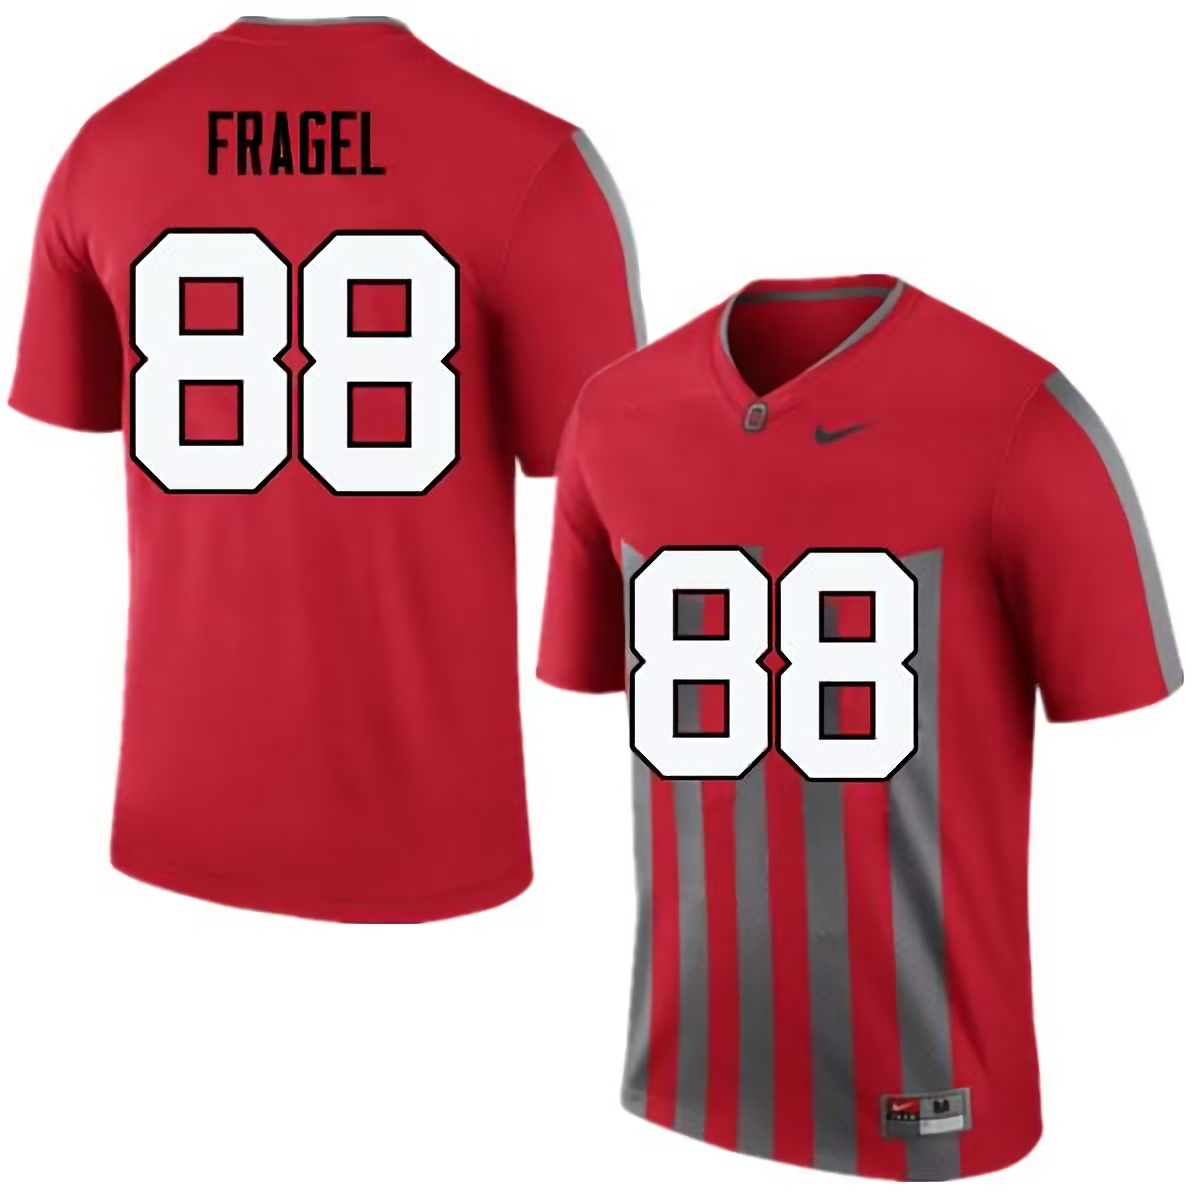 Reid Fragel Ohio State Buckeyes Men's NCAA #88 Nike Throwback Red College Stitched Football Jersey YJU2656PY